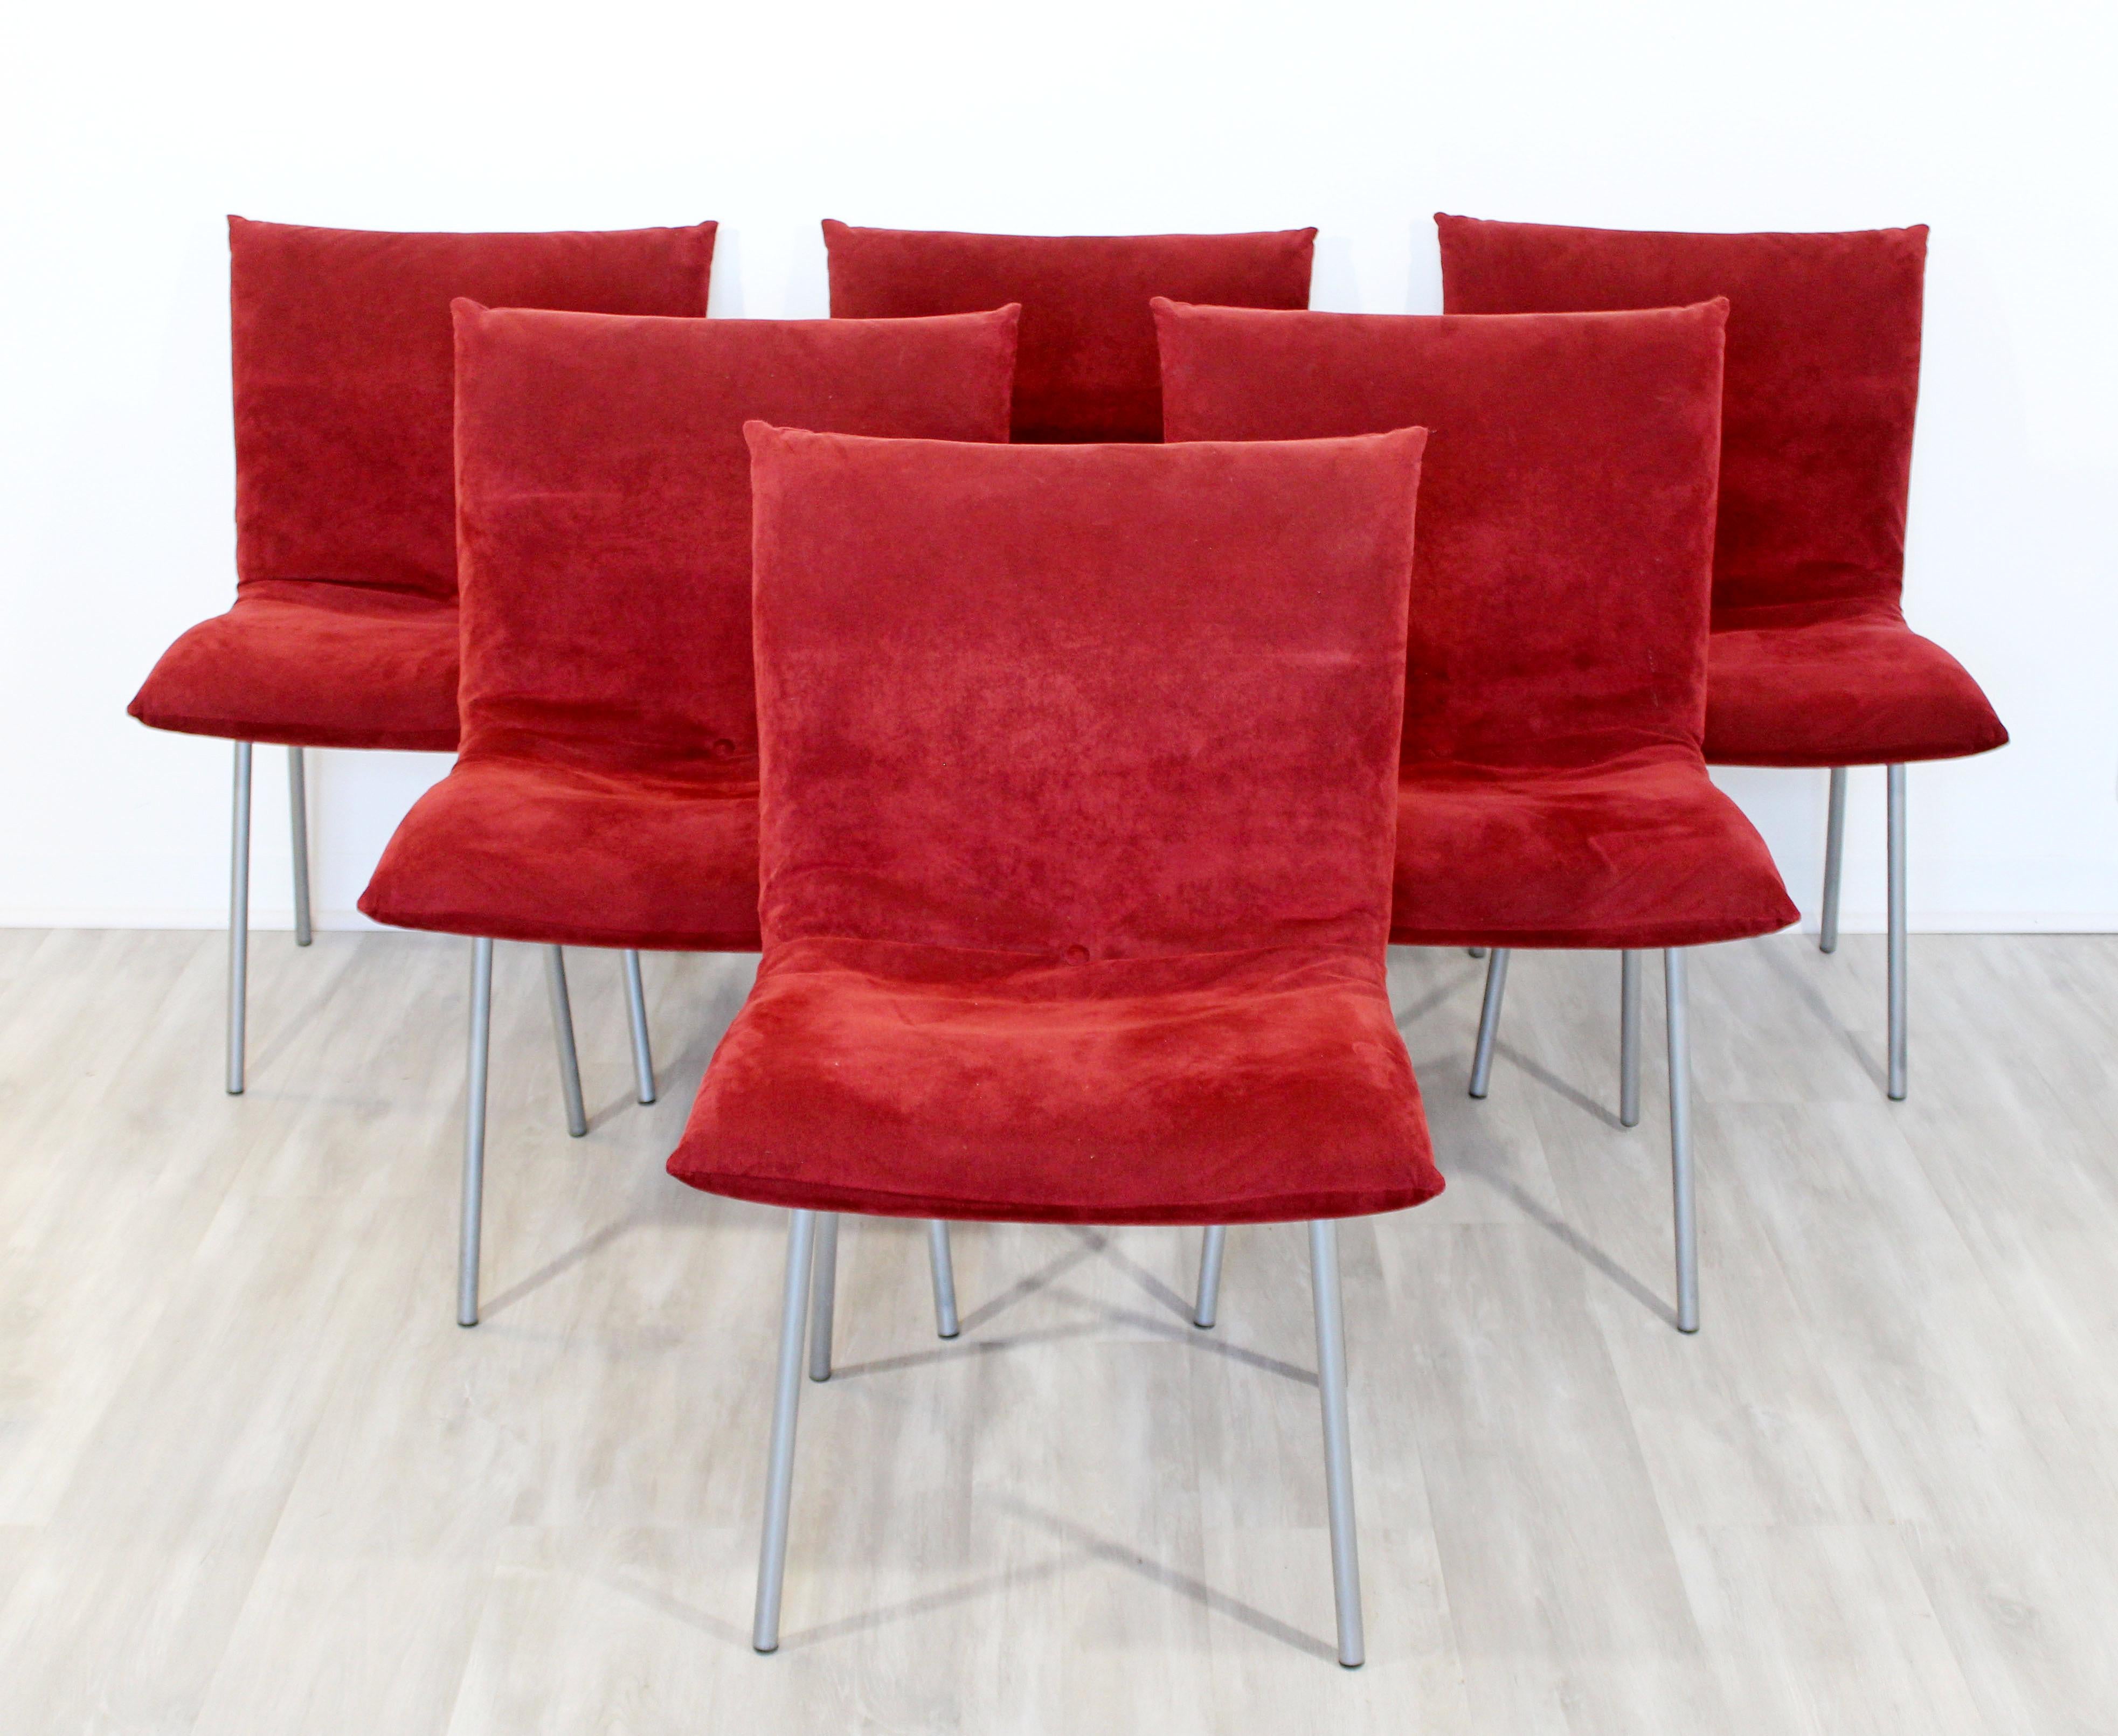 For your consideration is an elegant set of six side Calin Pascal dining chairs, with chrome legs and red suede upholstery, by Ligne Roset, circa 1960s. In very good condition. The dimensions of each are 21